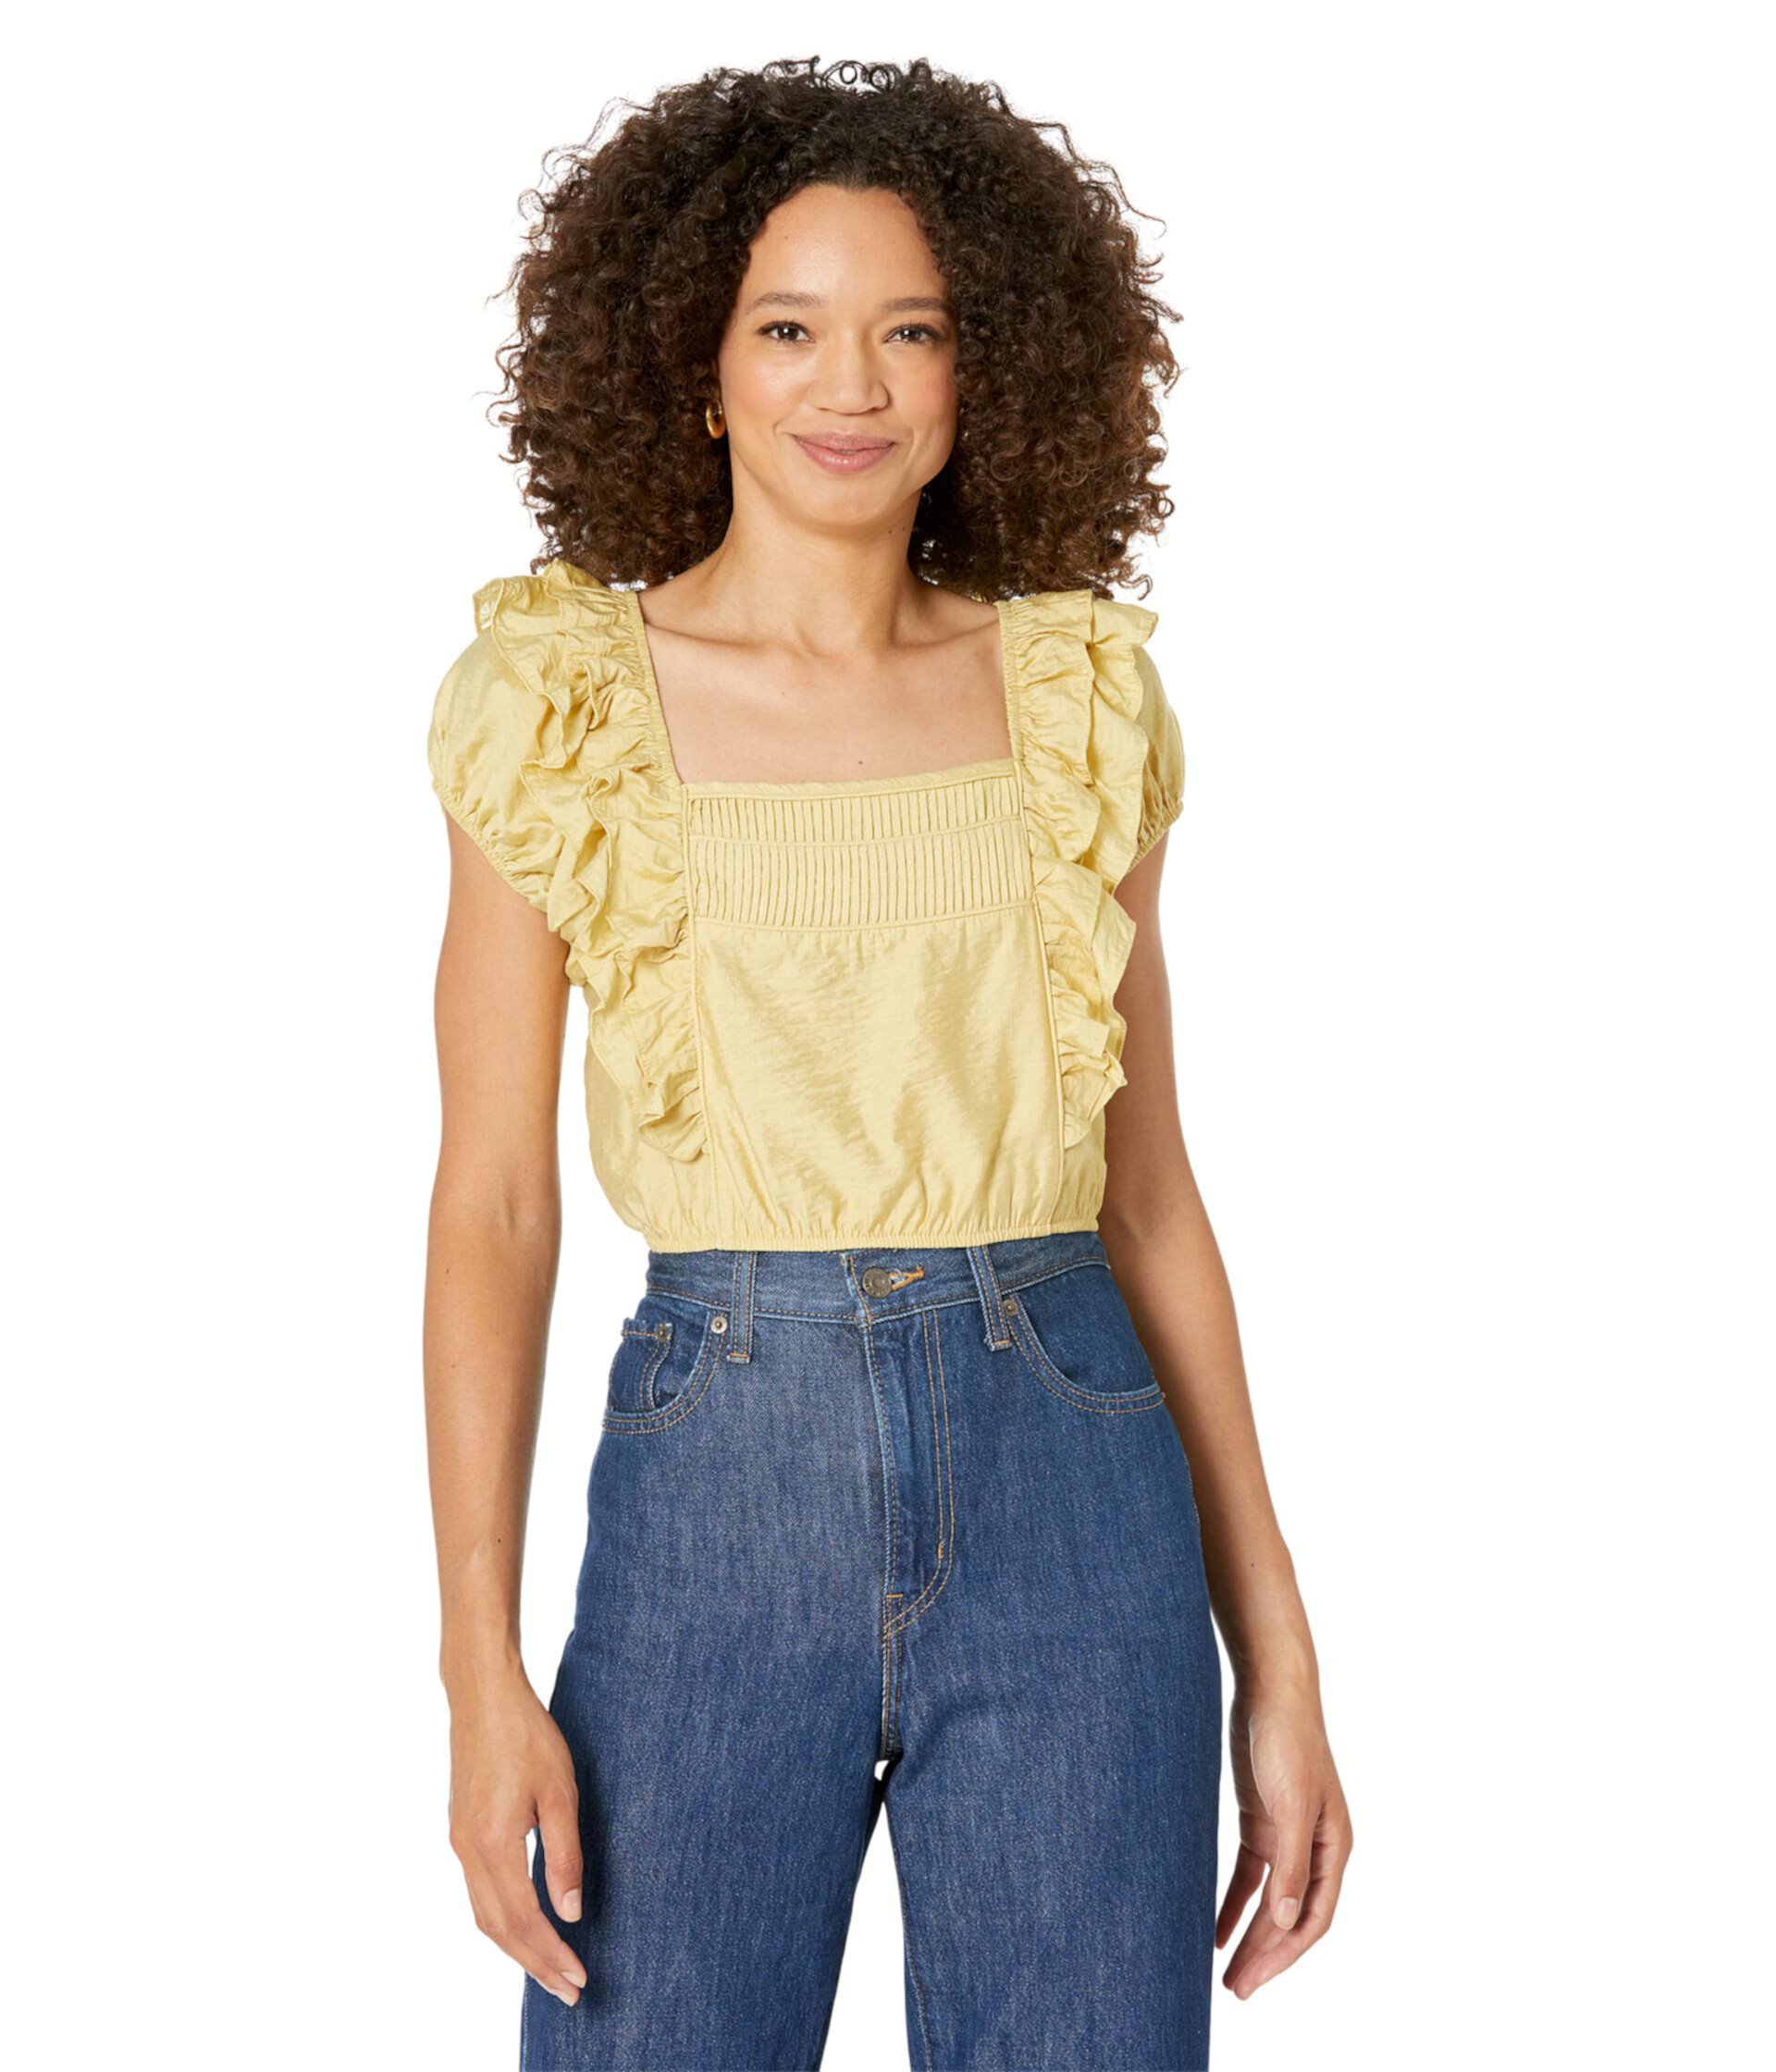 Woven Crop Top with Ruffle Sleeve Details MOON RIVER